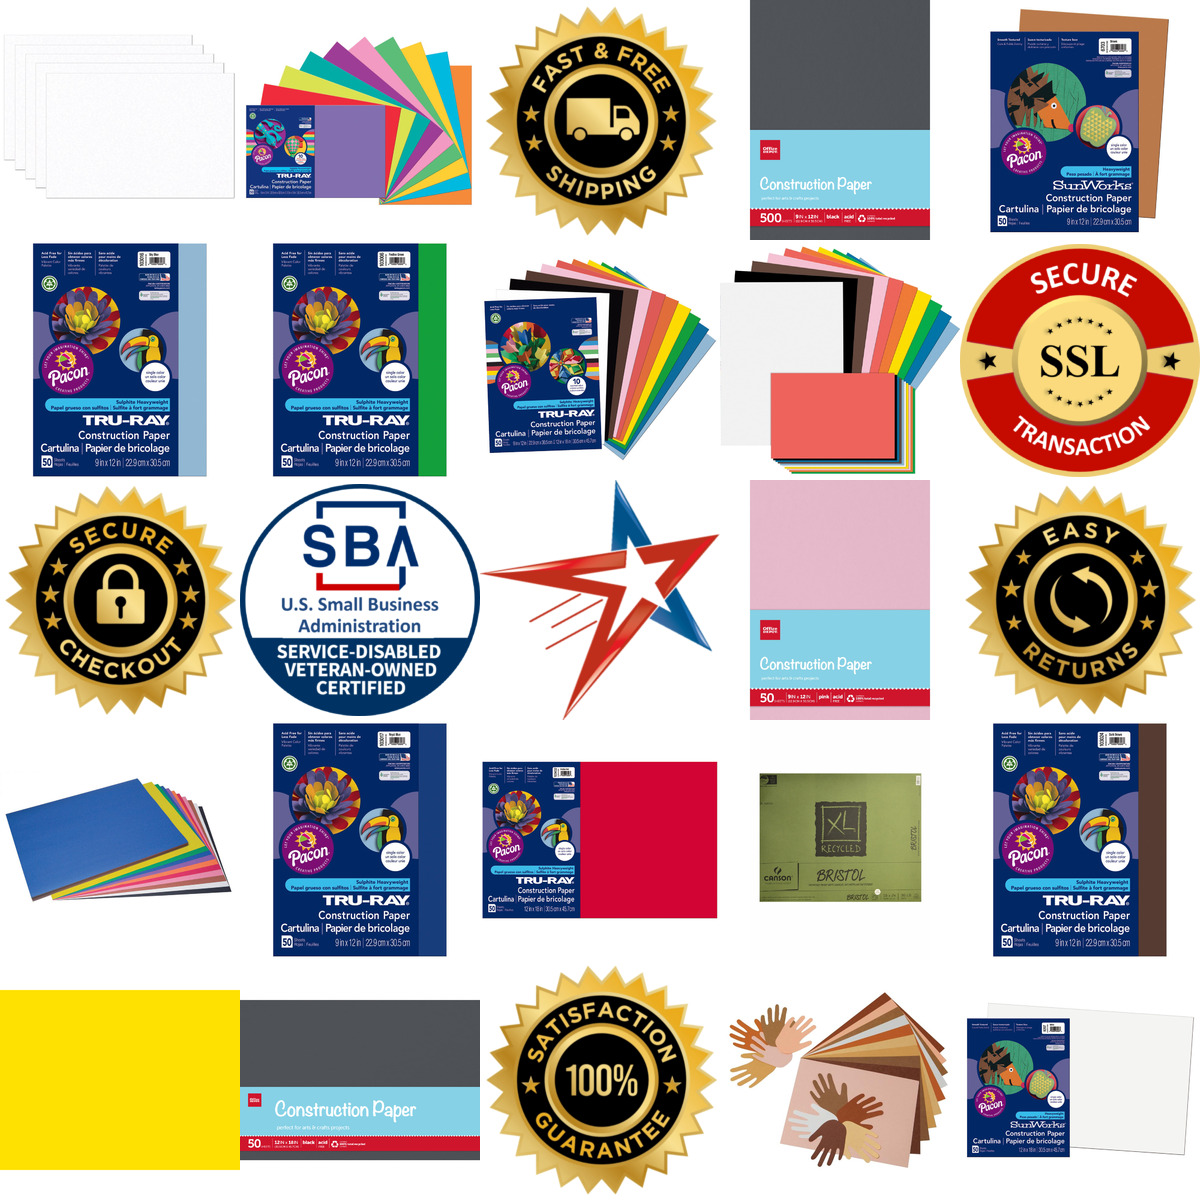 A selection of Construction Paper products on GoVets